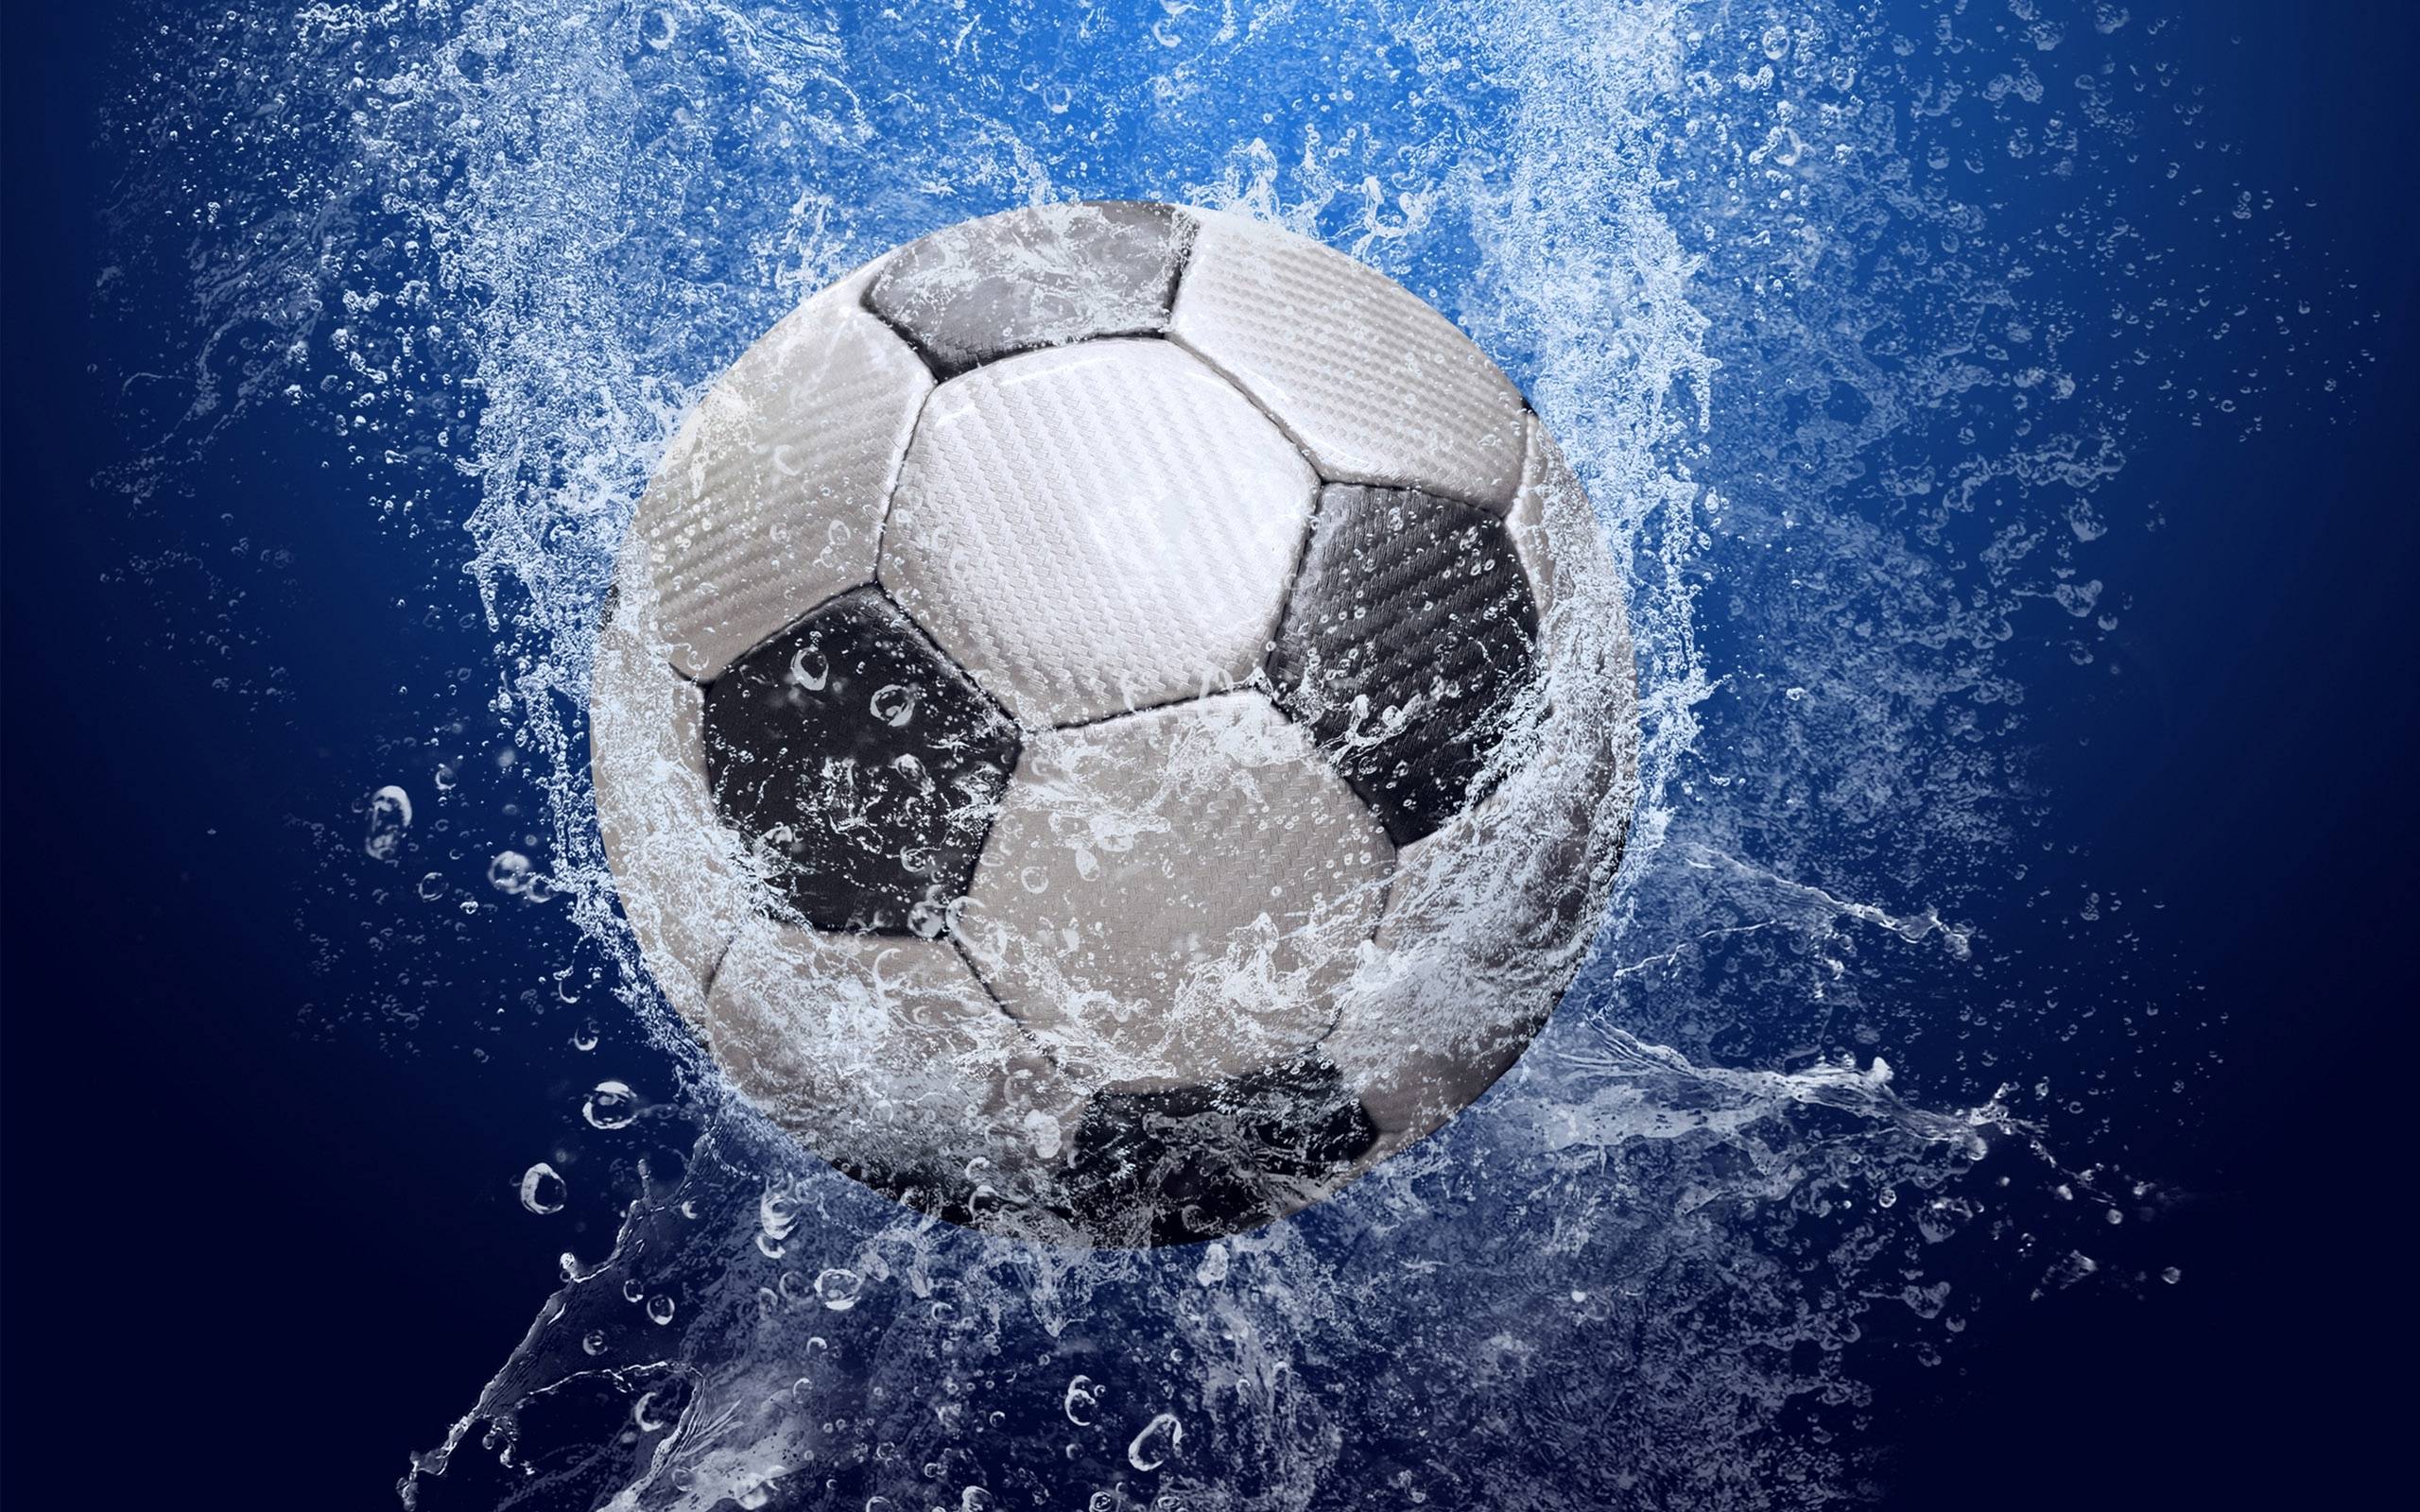 A soccer ball in the water - Soccer